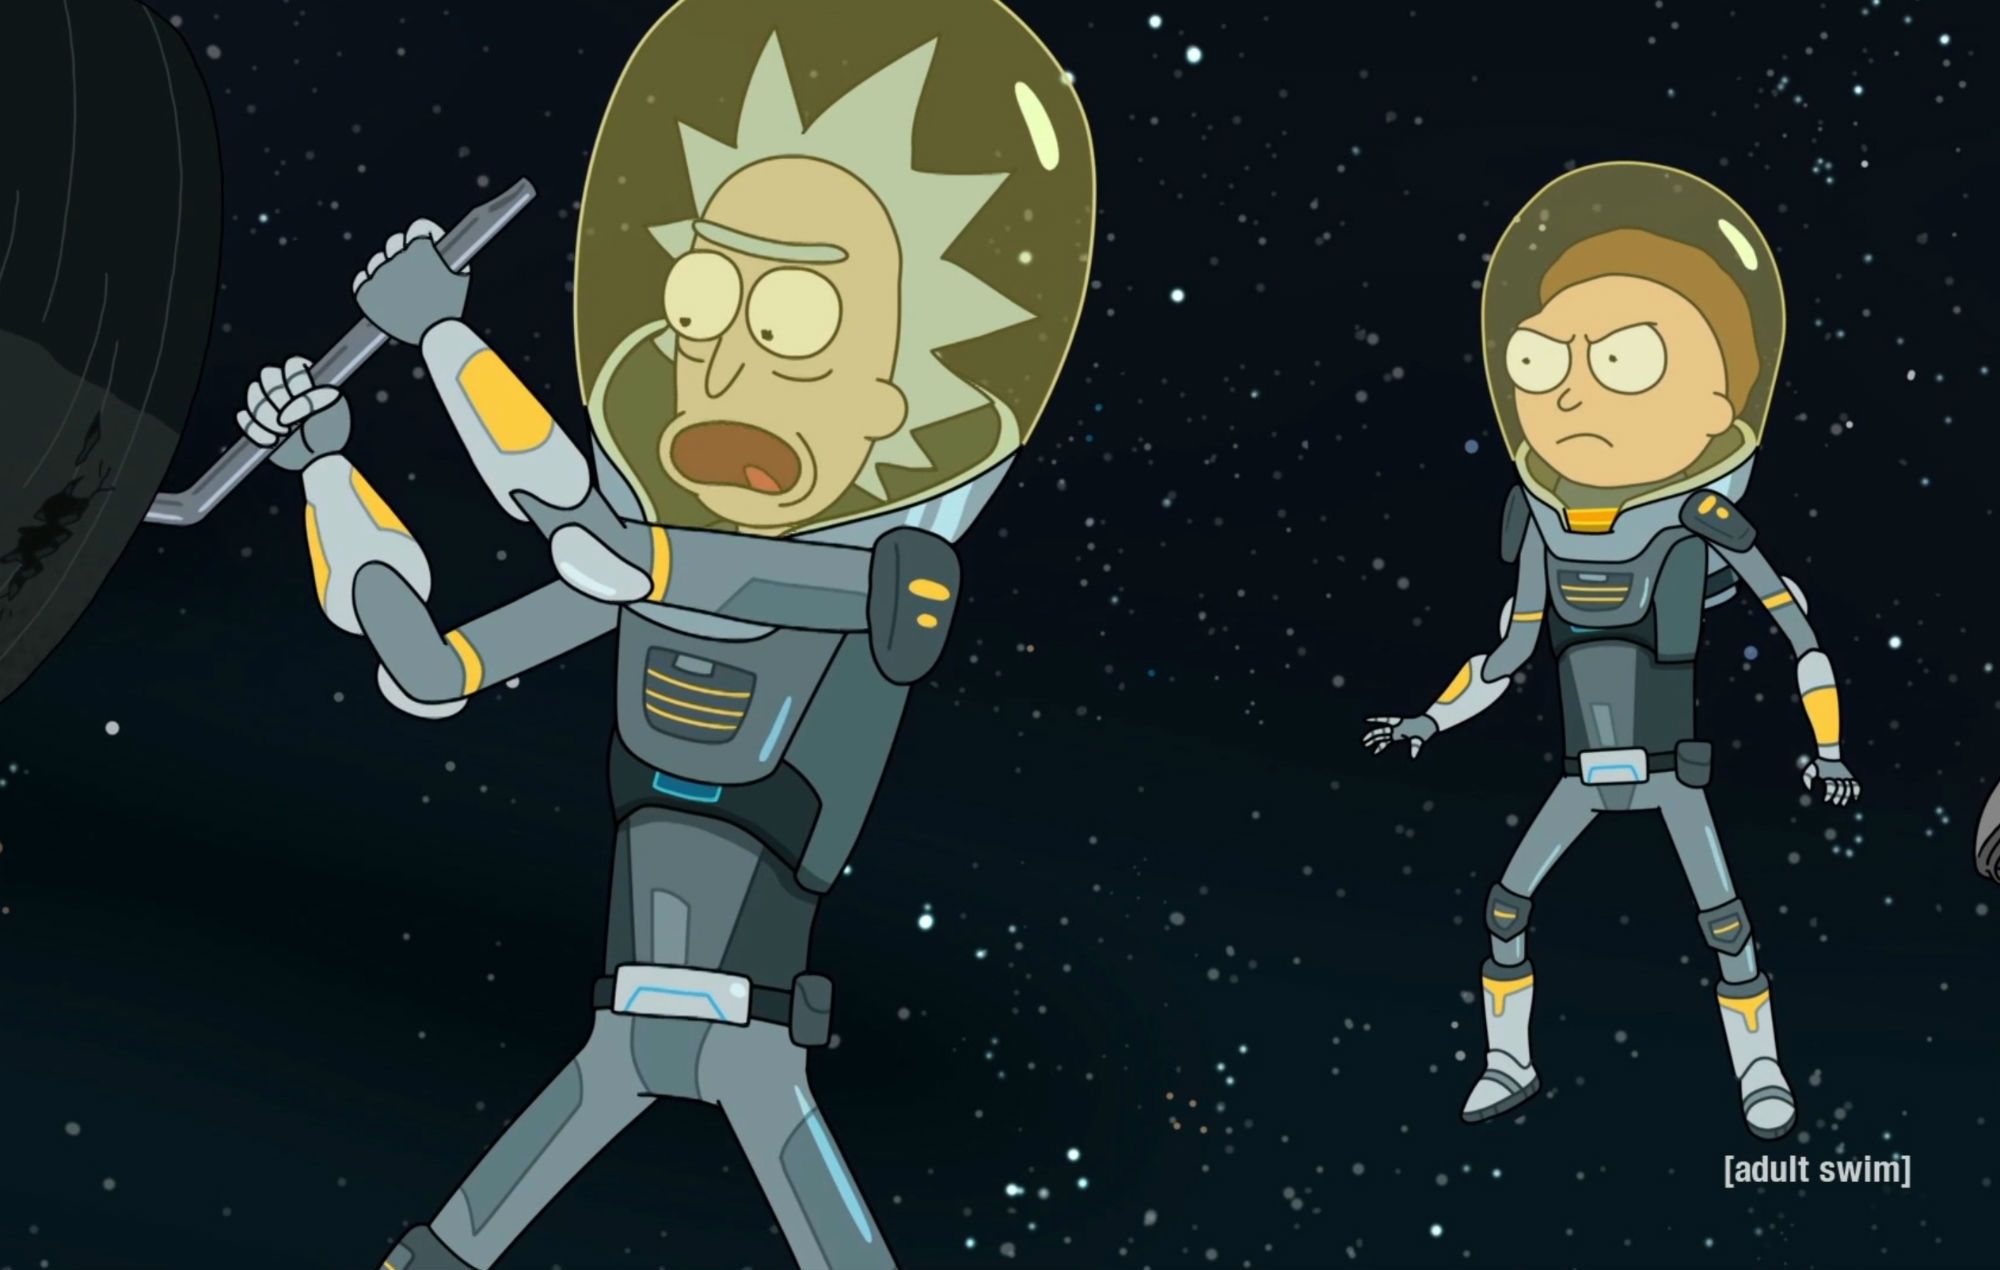 Rick and Morty' Season 4: Release date, trailers, plot and cast details